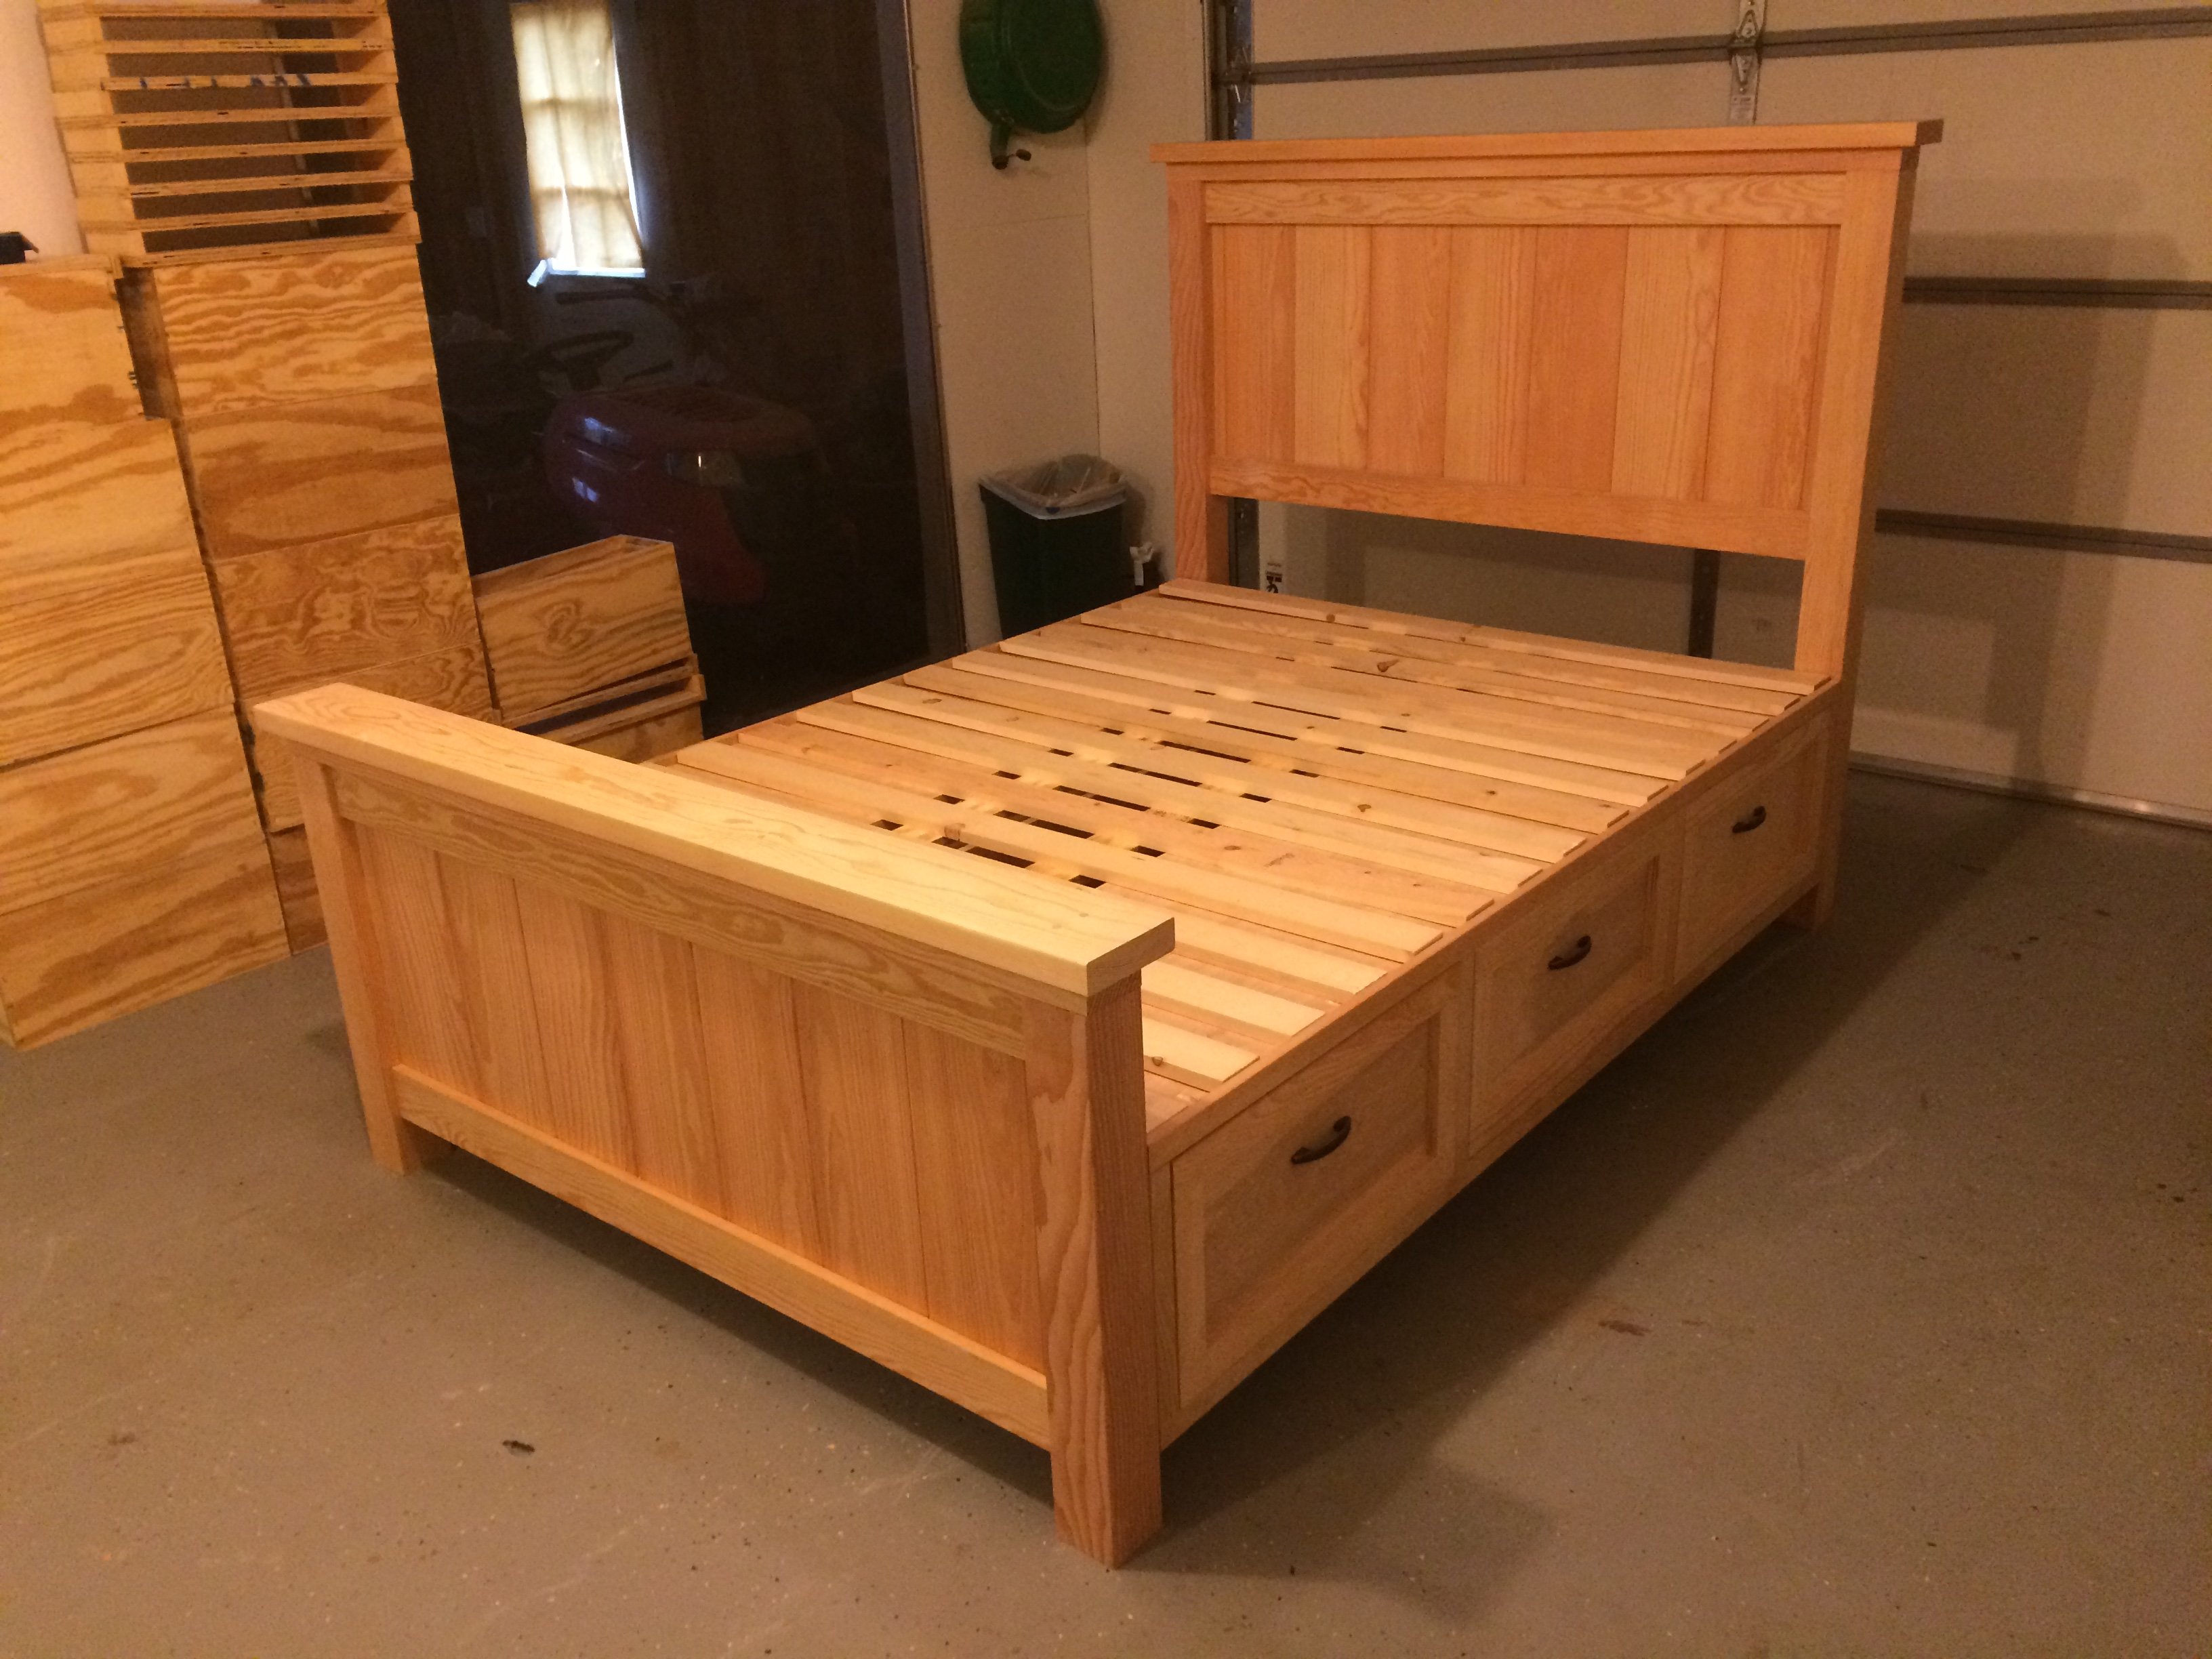 Farmhouse Storage Bed With Drawers, Platform Bed With Drawers Twin Size